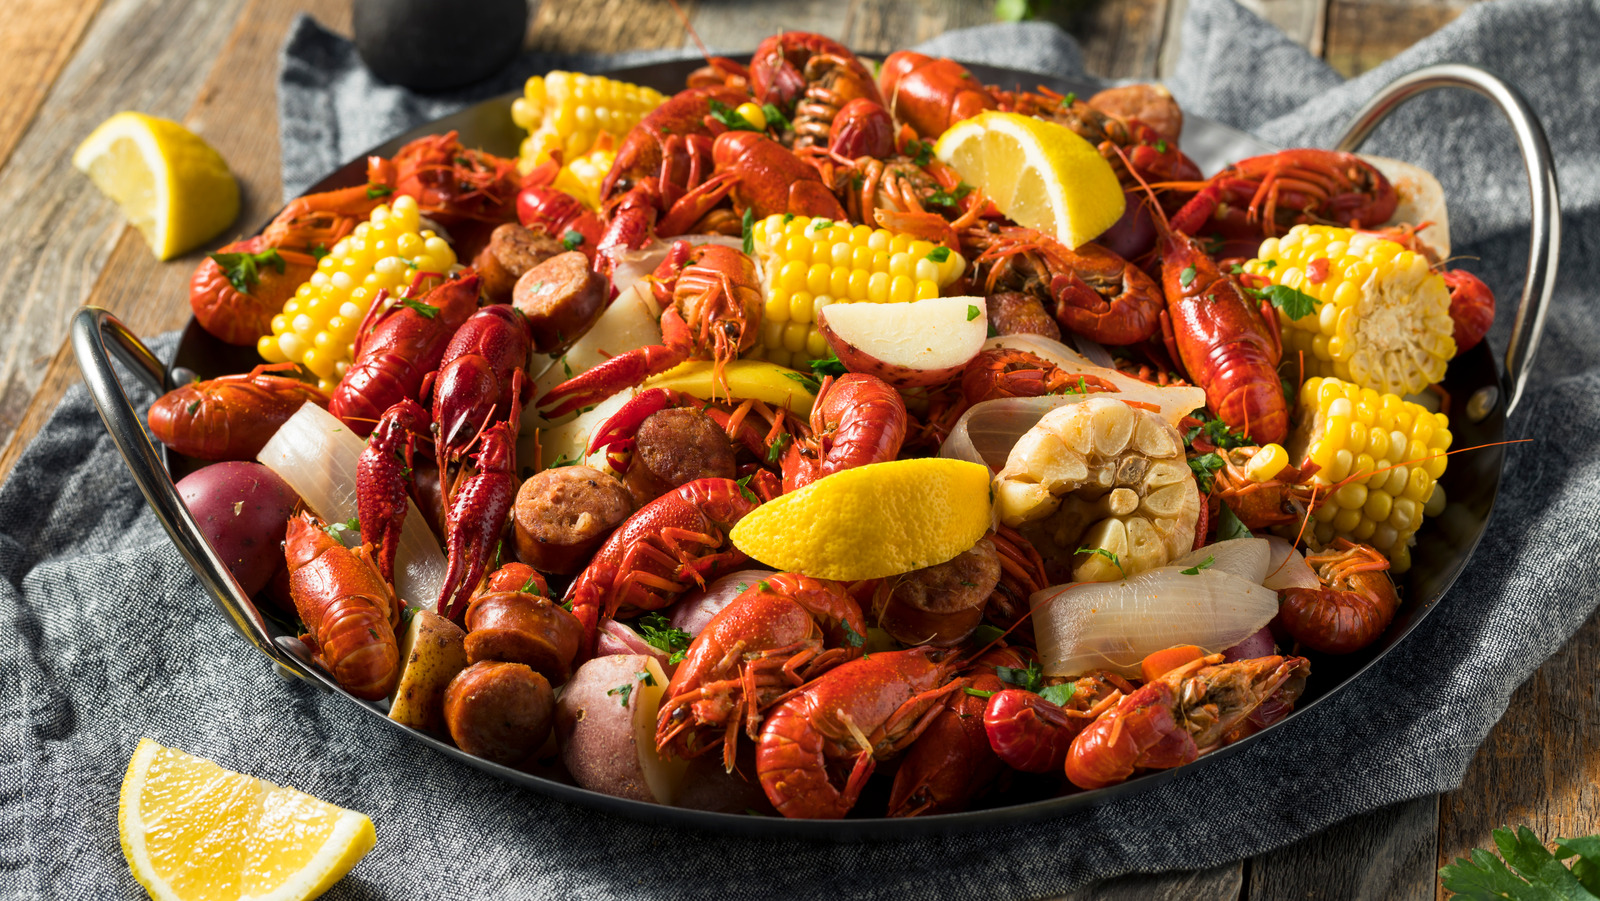 The essential guide to catching and eating Crawfish